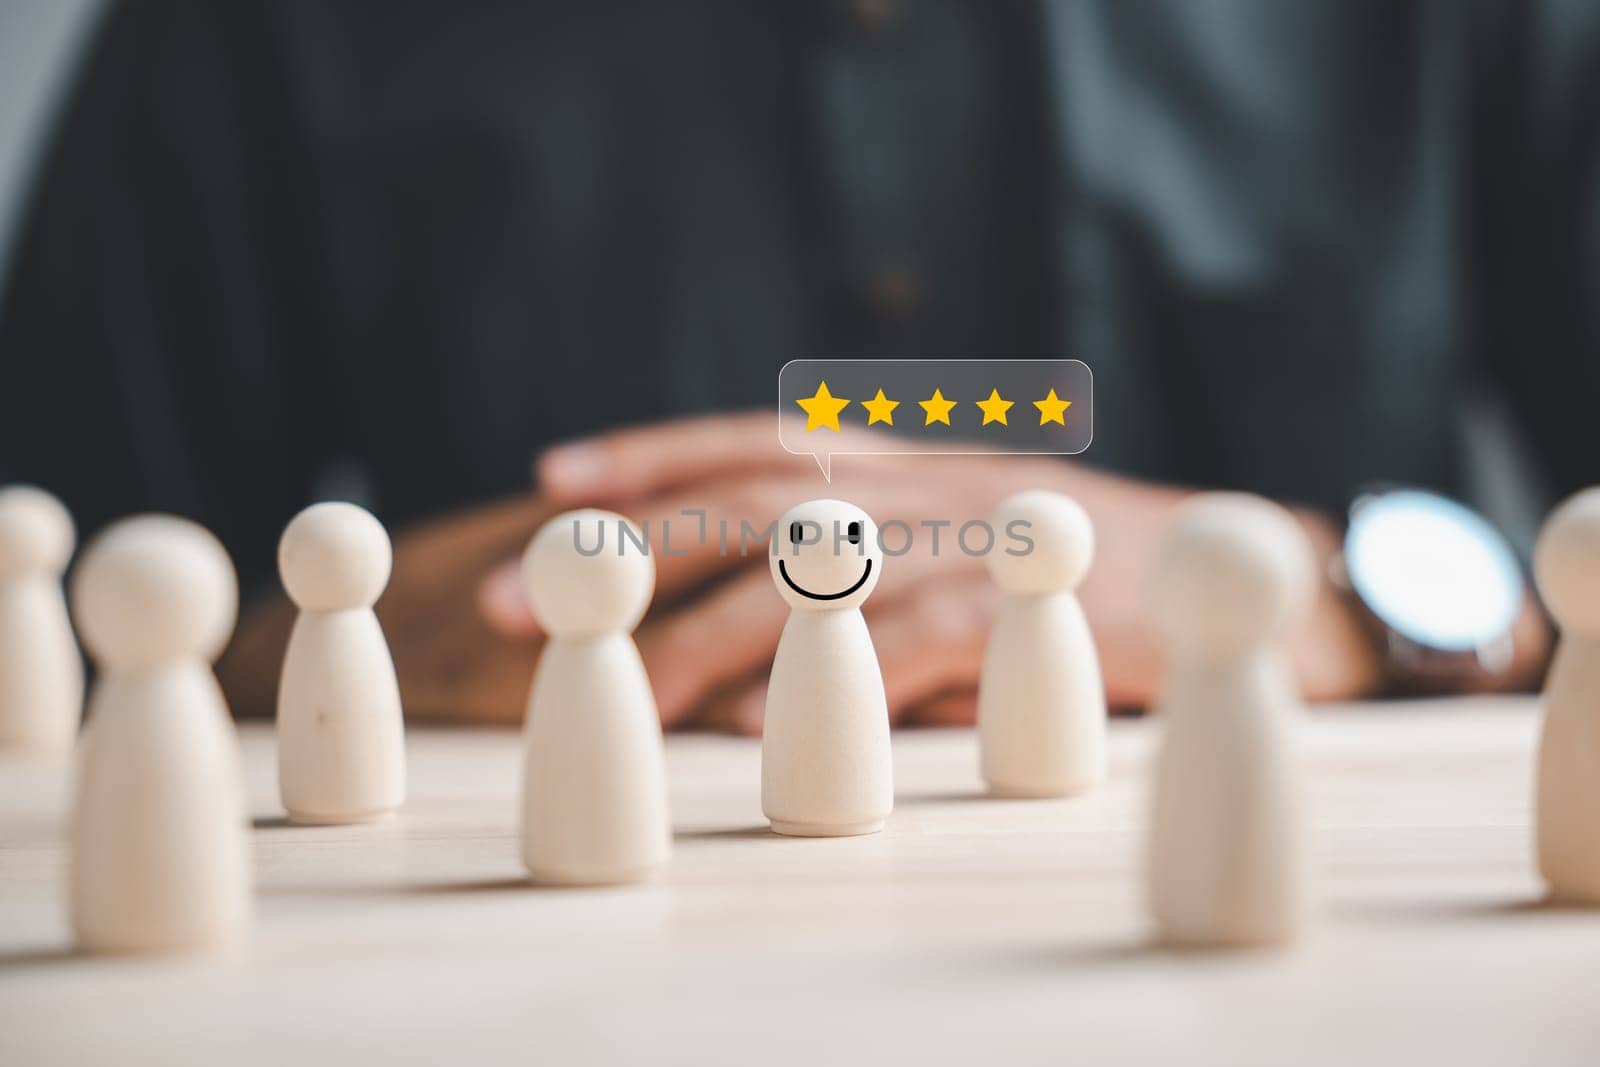 Wooden figure representing customer service rating. Hand picked in crowd of people. HR management selects positive leader with happy and smiling face to lead team towards success in business concept.